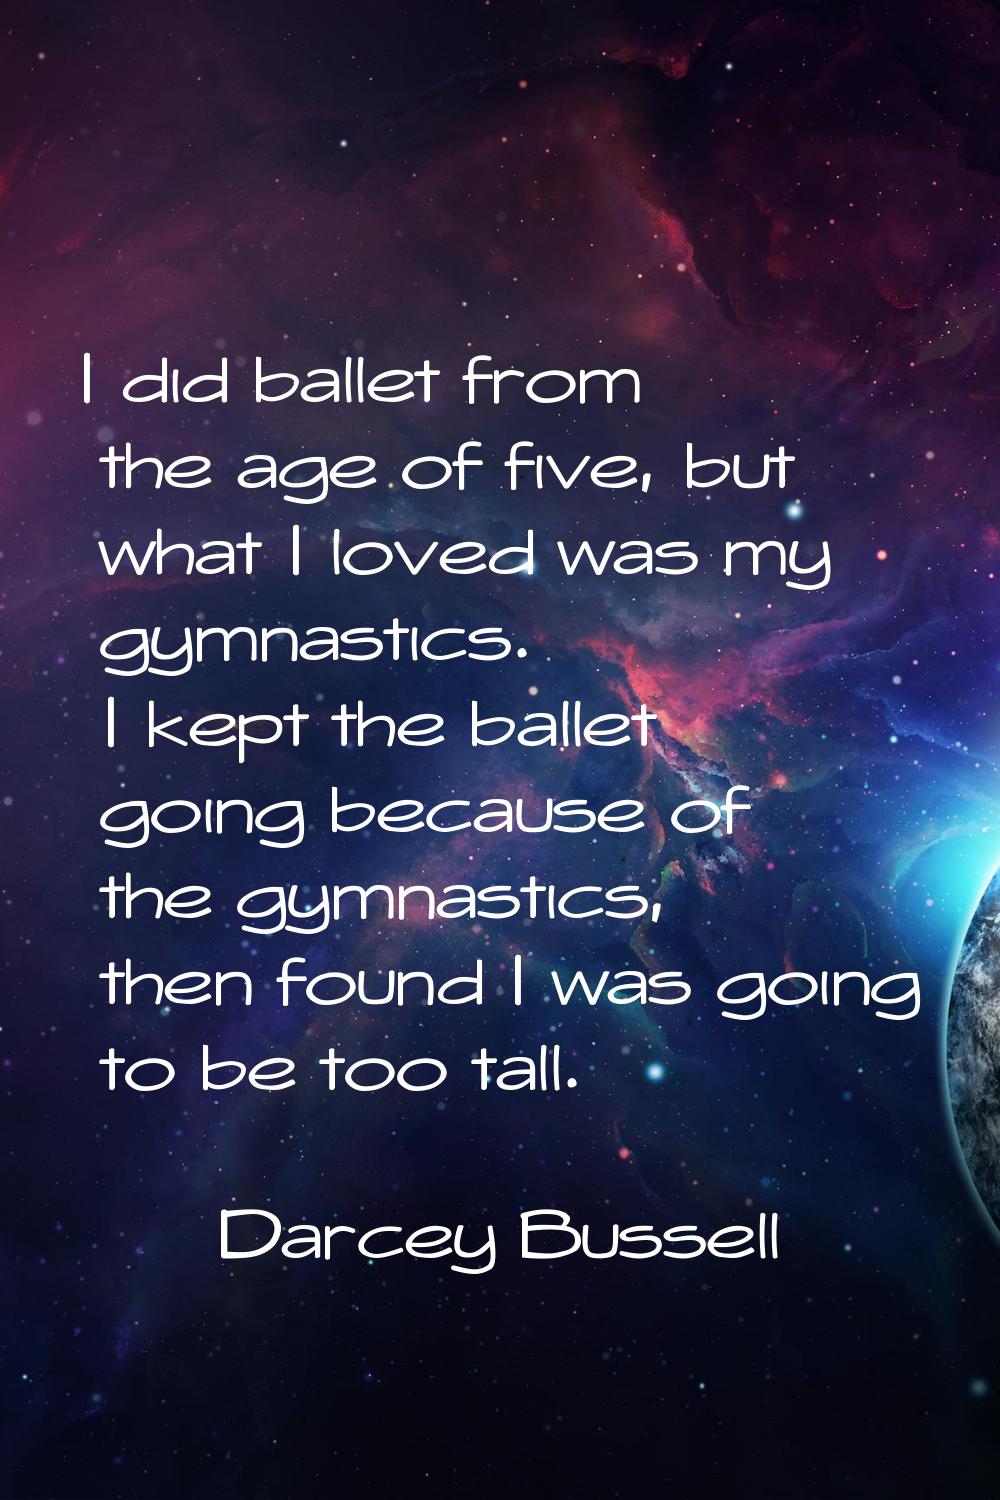 I did ballet from the age of five, but what I loved was my gymnastics. I kept the ballet going beca